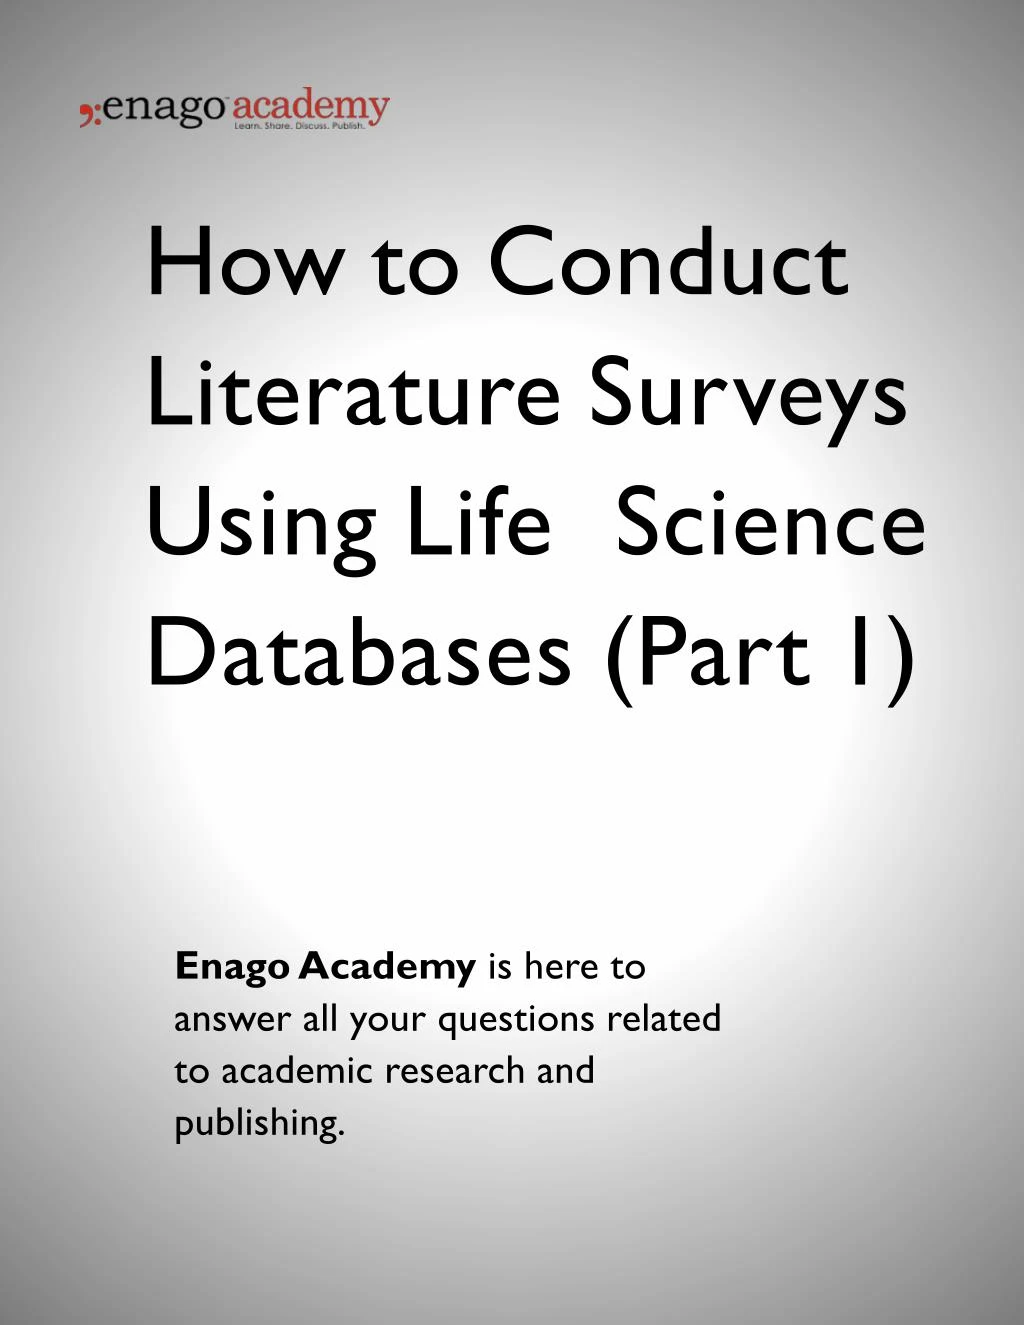 how to conduct literature surveys using life